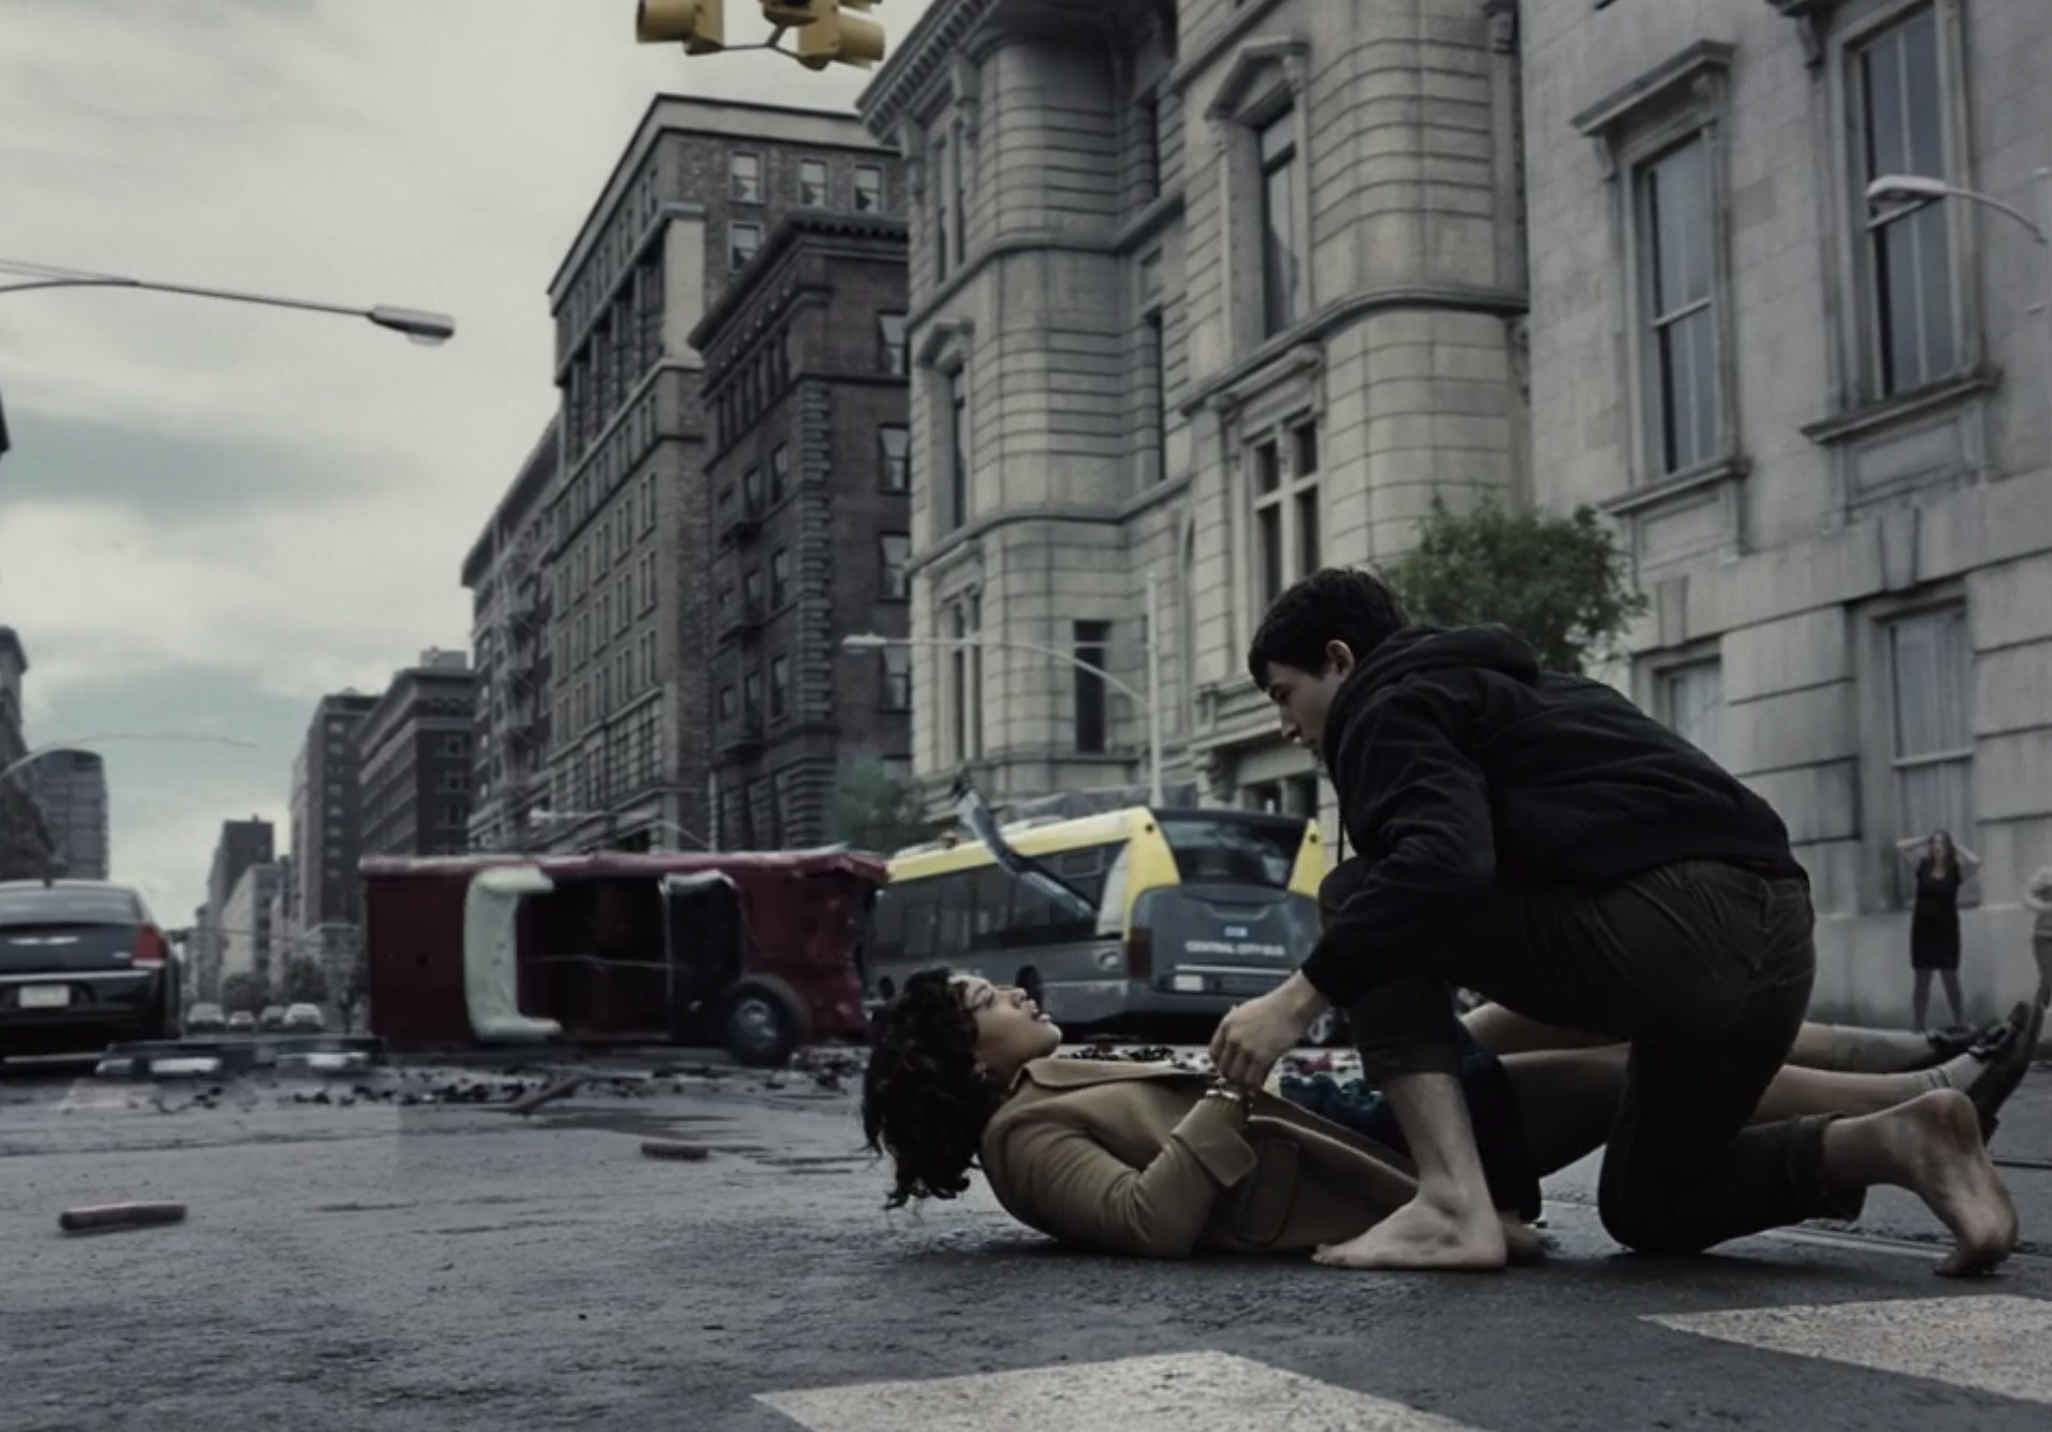 Barry leaning over Iris in the street after rescuing her